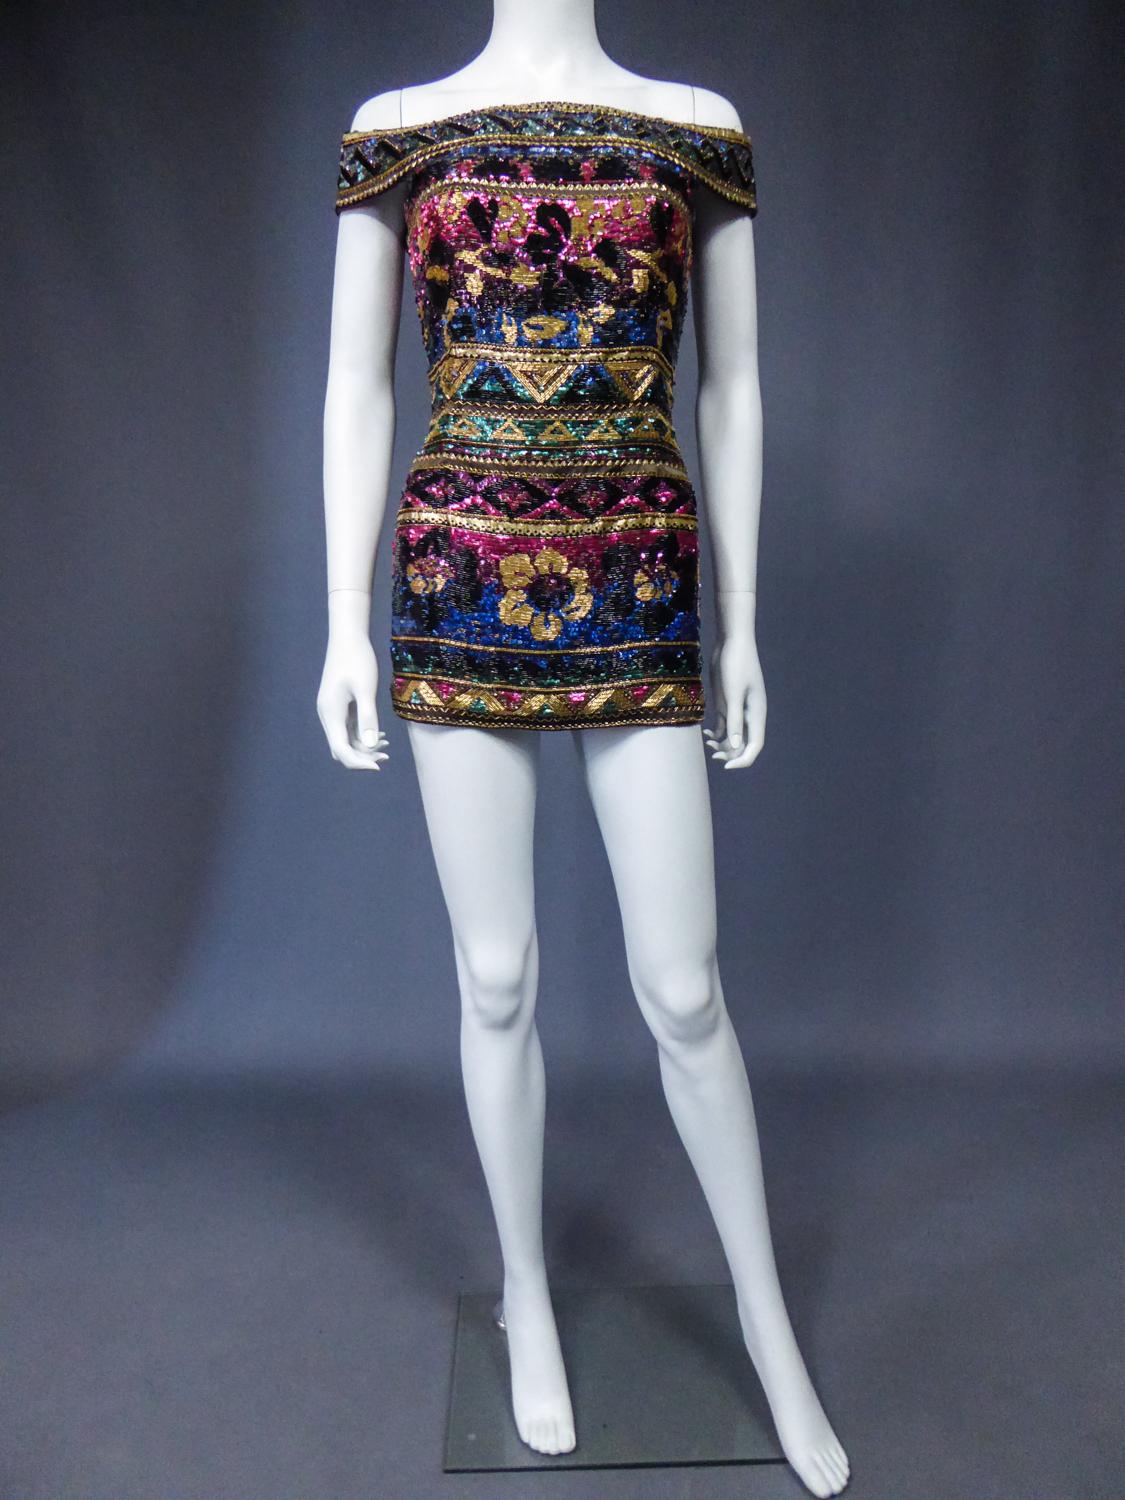 Late 1980
Italy Milan

Sleeveless evening tunic embroidered with spangles by Mila Schön (attributed to) probably dating from one of her Couture fashion shows of the 1980s. Embroidery of spangles, pearls and tubular sequins by flowery and